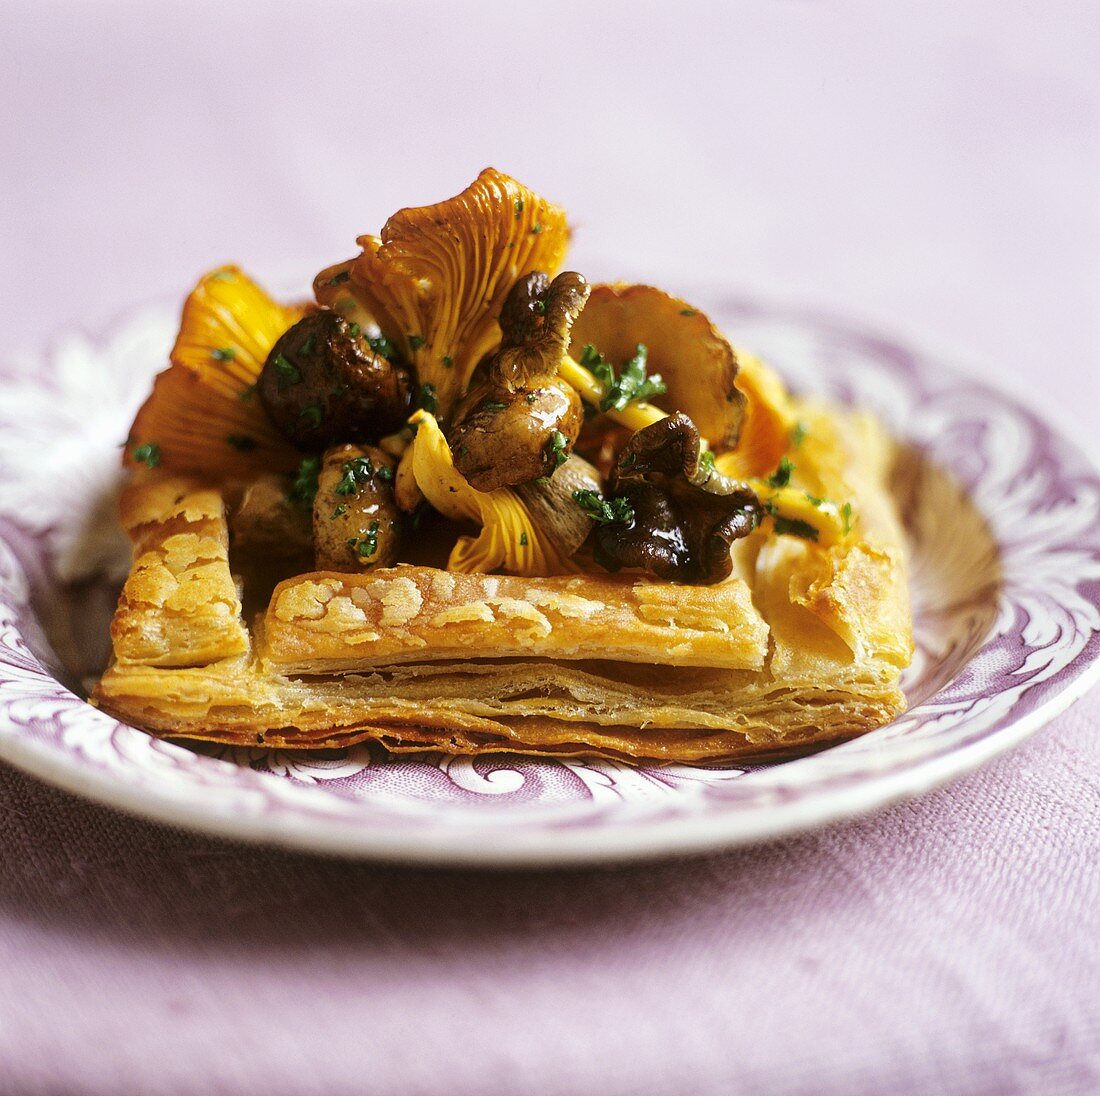 Puff pastry tart with mushroom filling